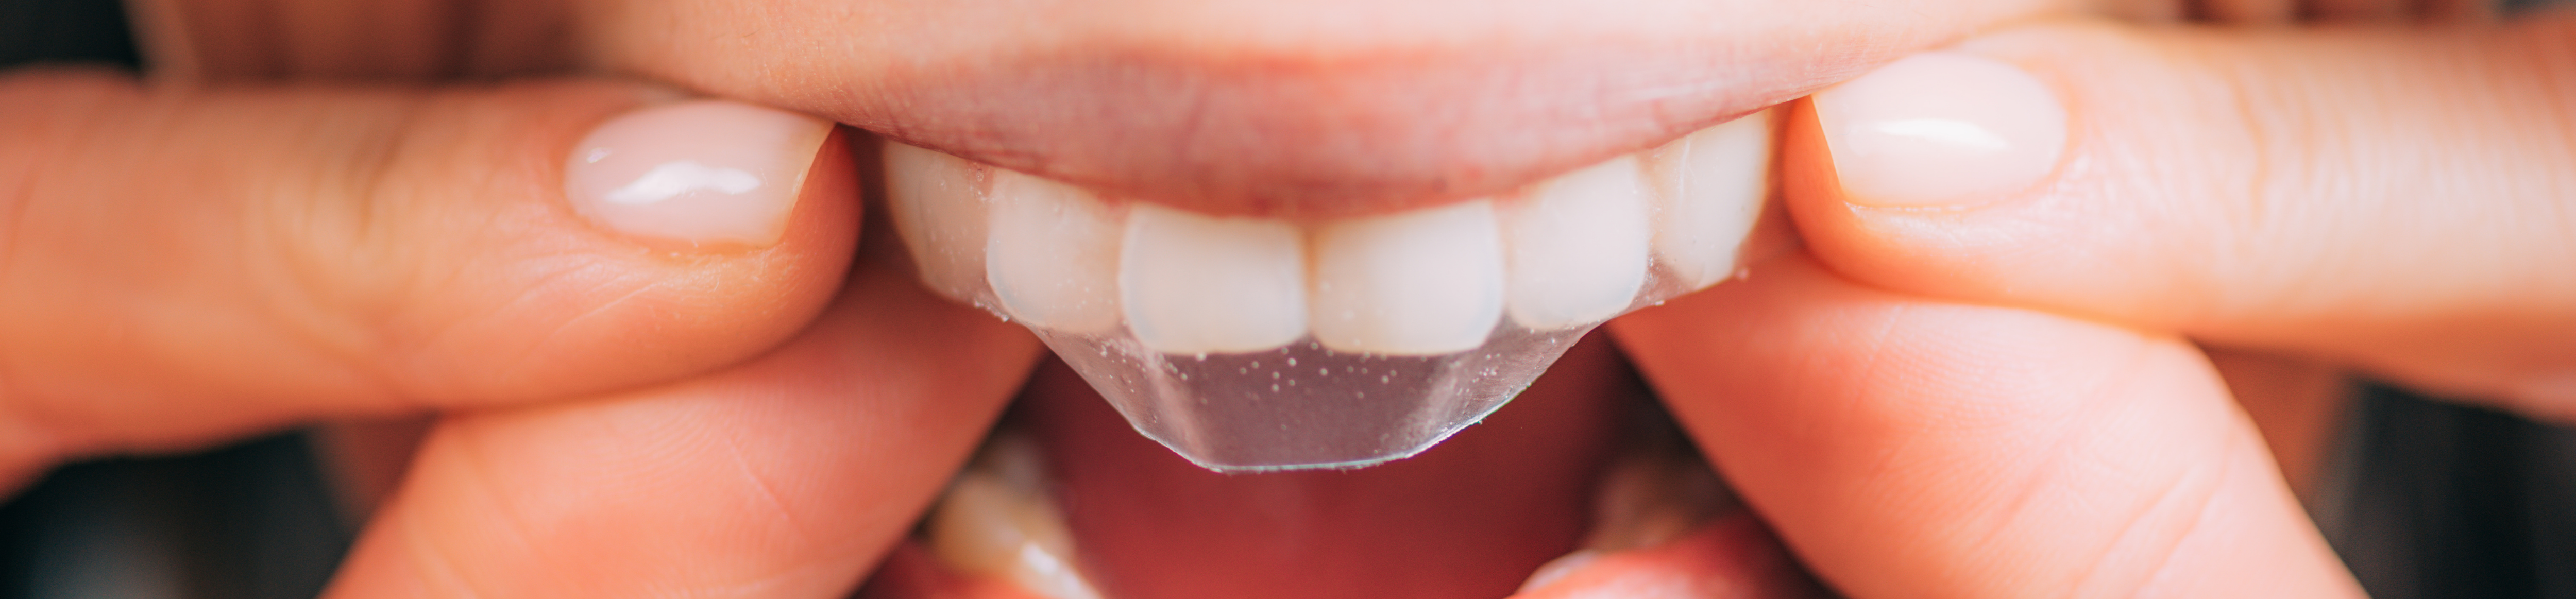 The Truth about Illegal Teeth Whitening